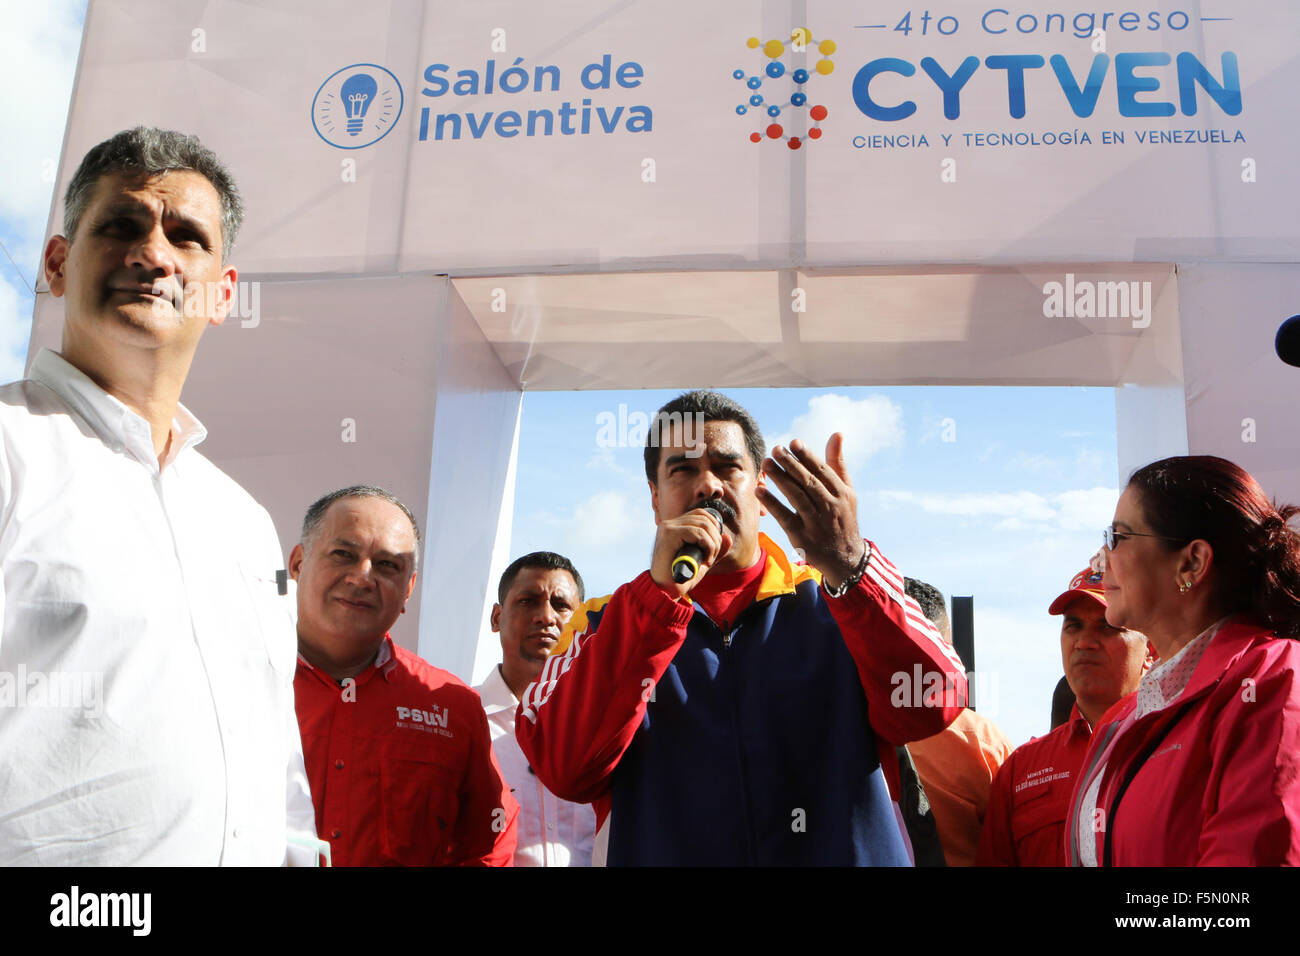 Maturin, Venezuela. 6th Nov, 2015. Photo provided by Venezuela's Presidency shows Venezuelan President Nicolas Maduro (C) addressing the awarding ceremony of the National Science, Technology and Innovation Awards 2015 in Maturin City of Monagas State, Venezuela, Nov. 6, 2015. © Venezuela's Presidency/Xinhua/Alamy Live News Stock Photo